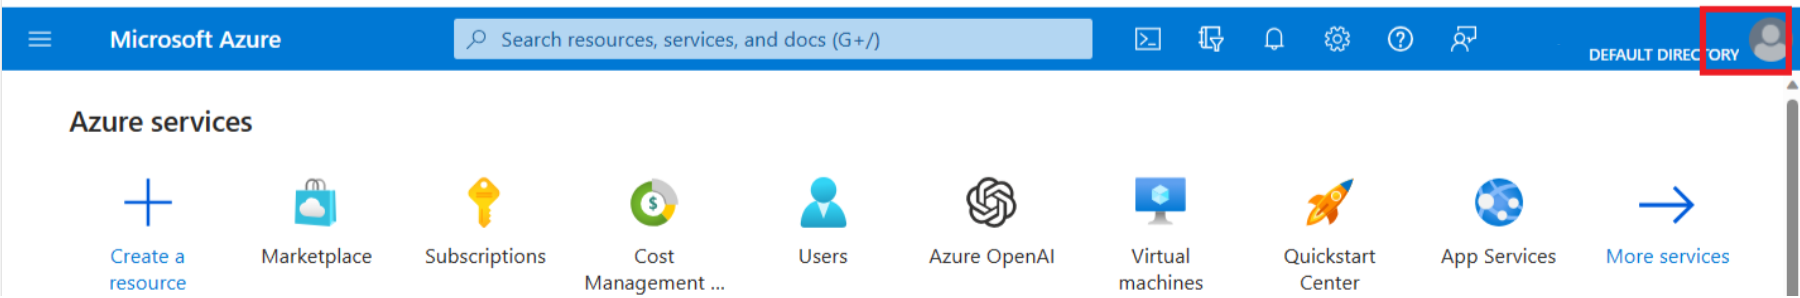 Screenshot of the top bar of the Azure screen, with the Account profile icon selected.